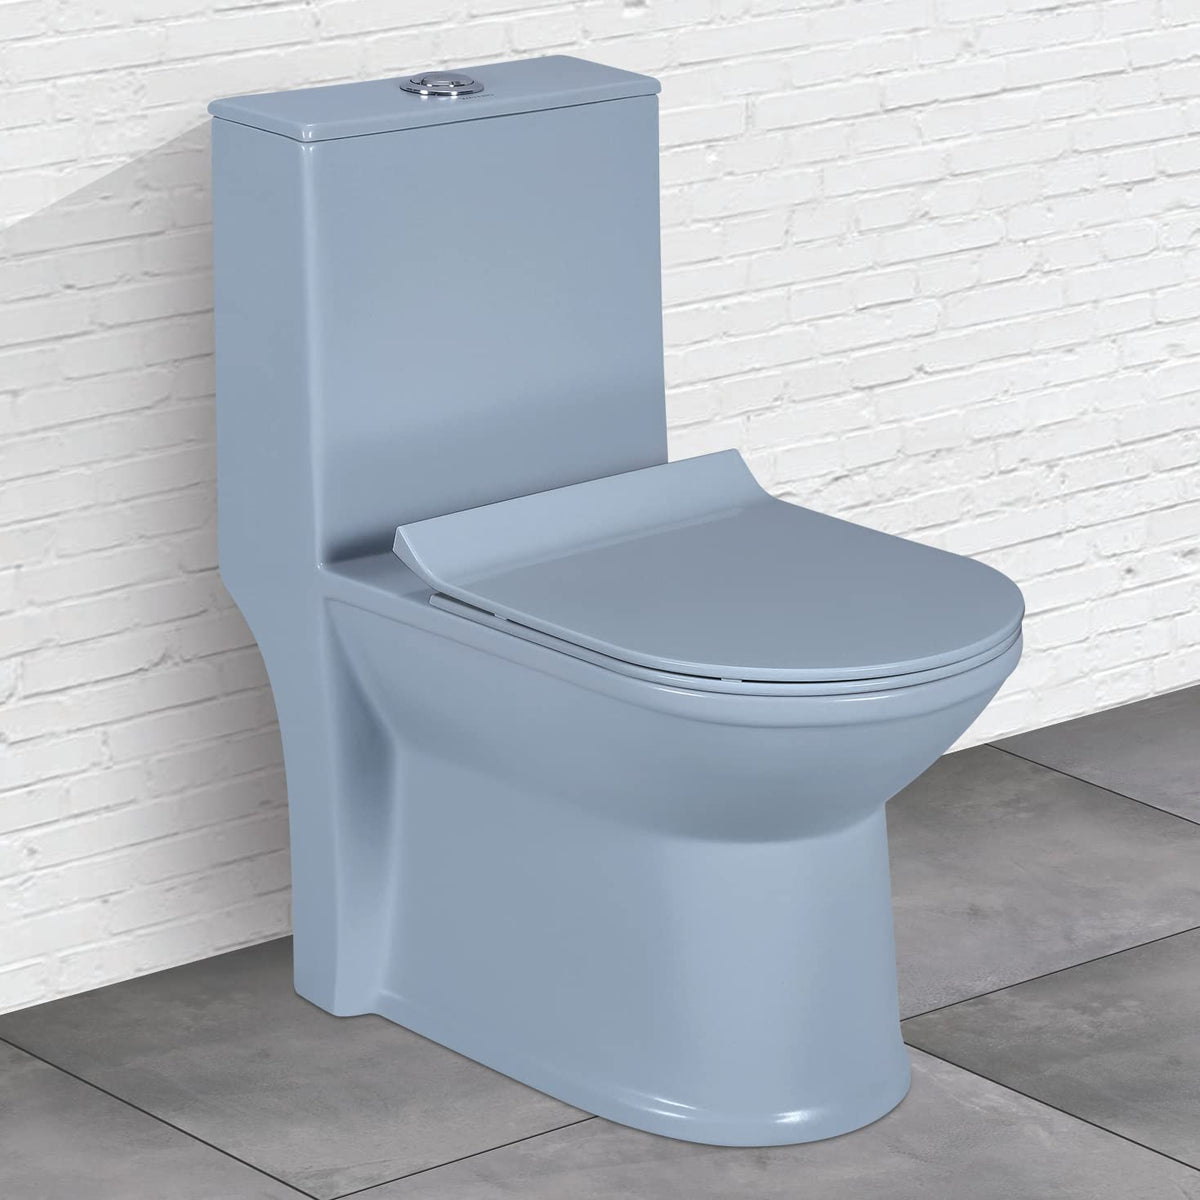 Plantex Platinium Ceramic Rimless One Piece Western Toilet/Water Closet/Commode With Soft Close Toilet Seat - S Trap Outlet (APS-745, Ocean)